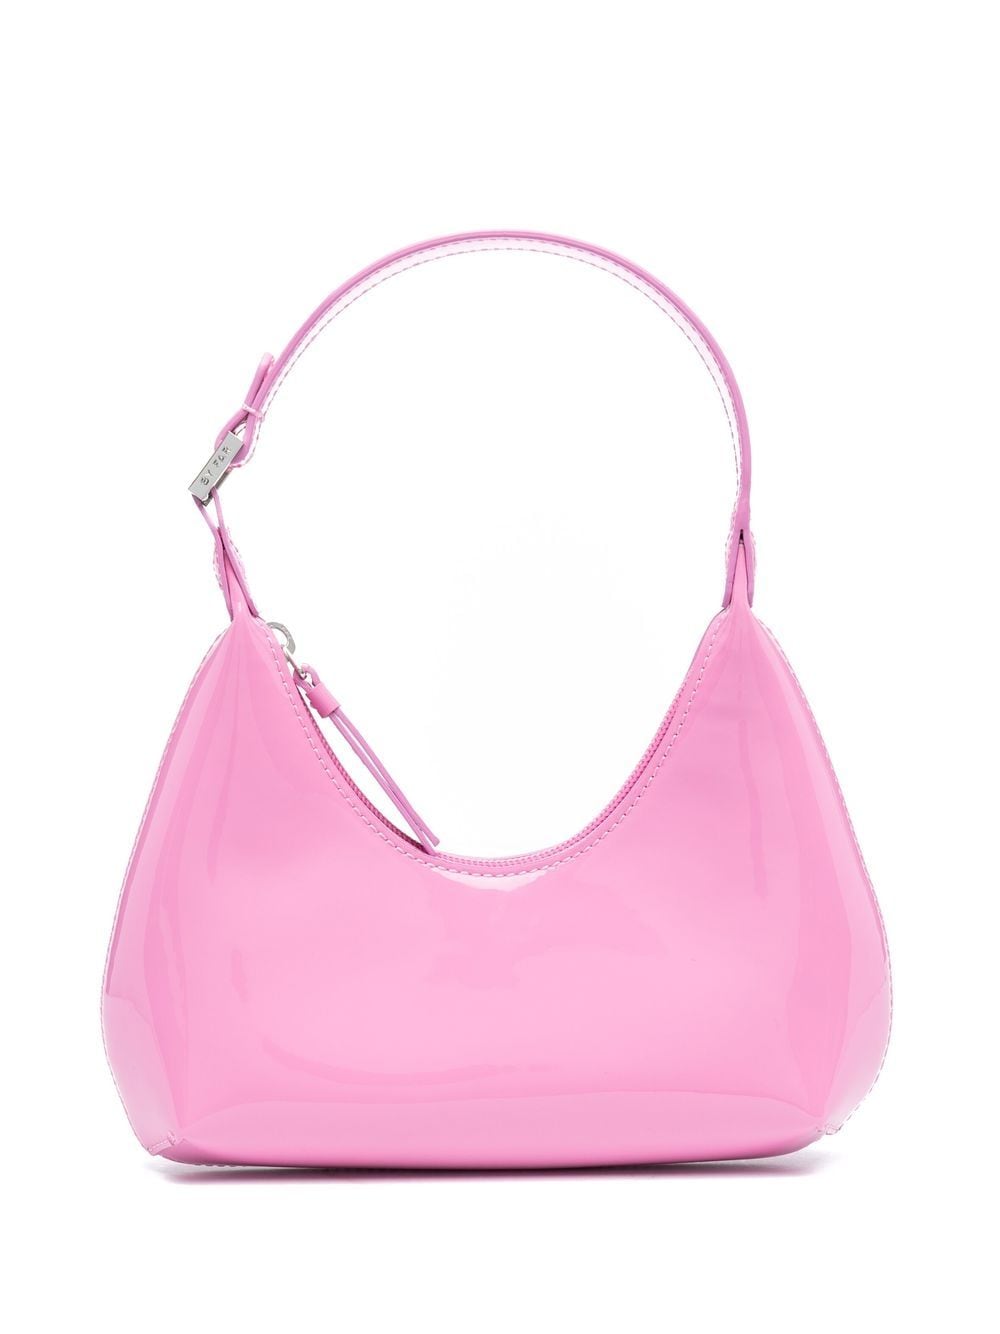 BY FAR Baby Amber patent leather shoulder bag - Pink von BY FAR